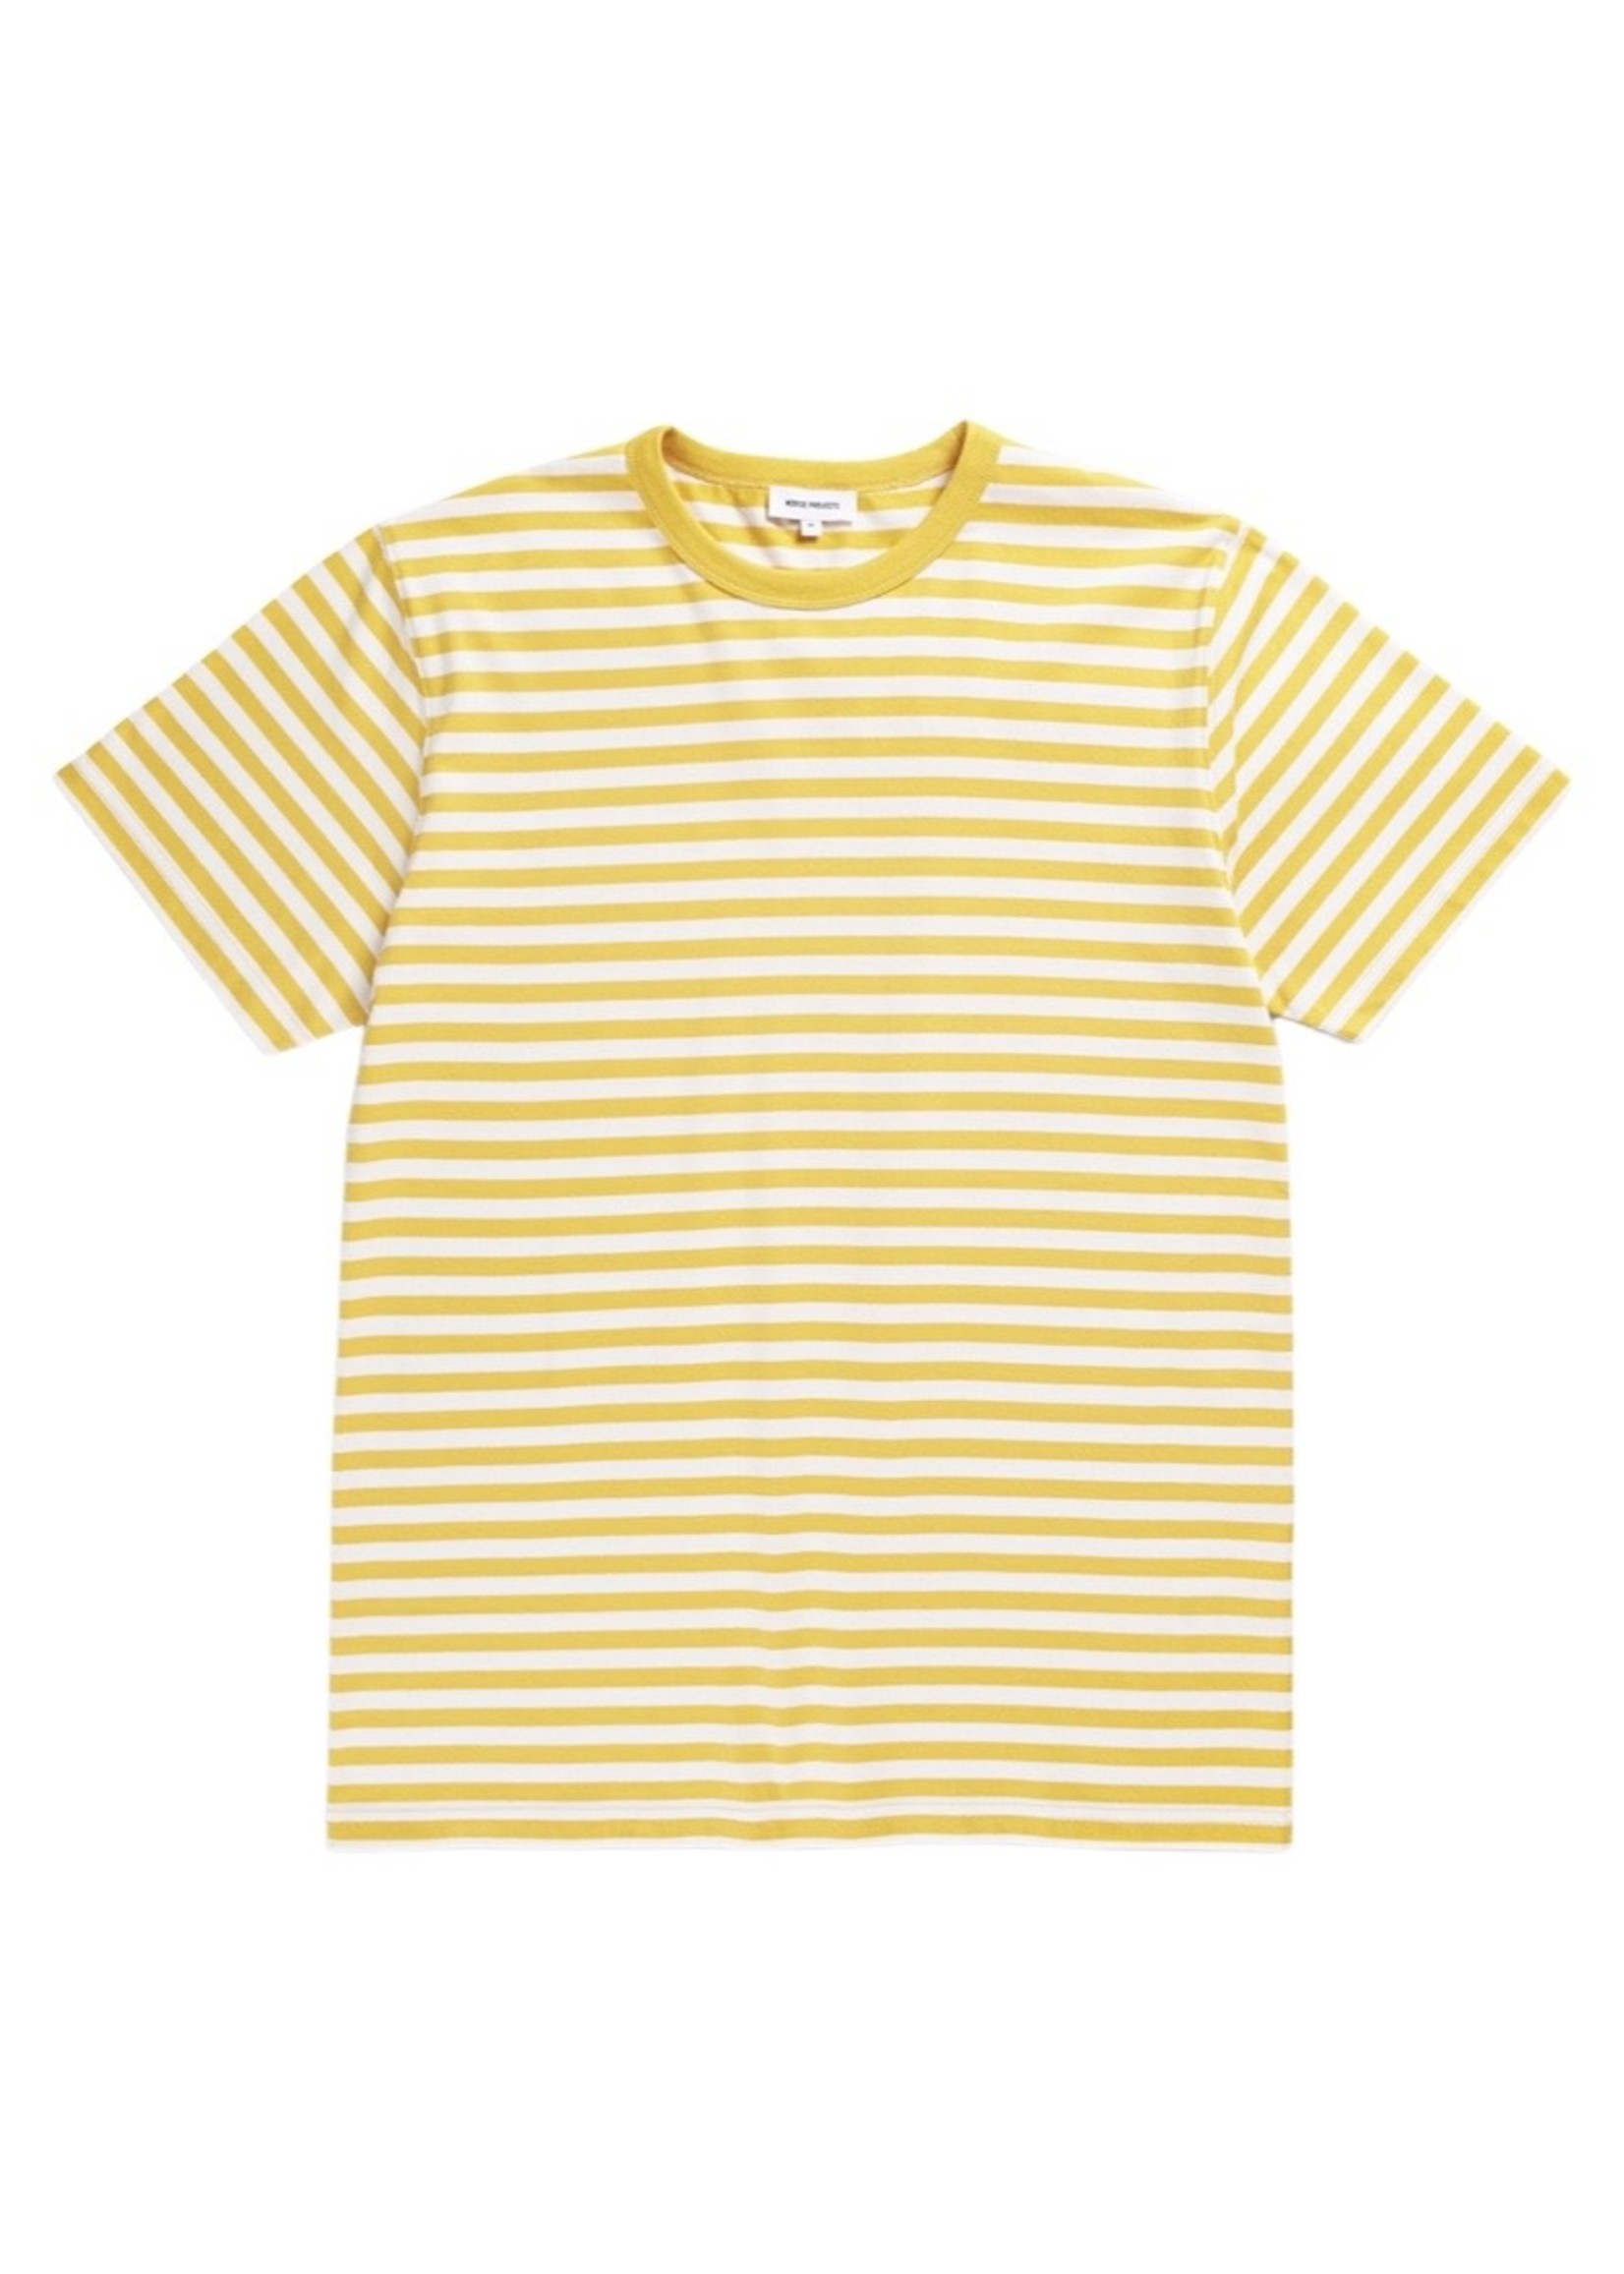 NORSE PROJECTS NIELS STRIPE TEE SHIRT